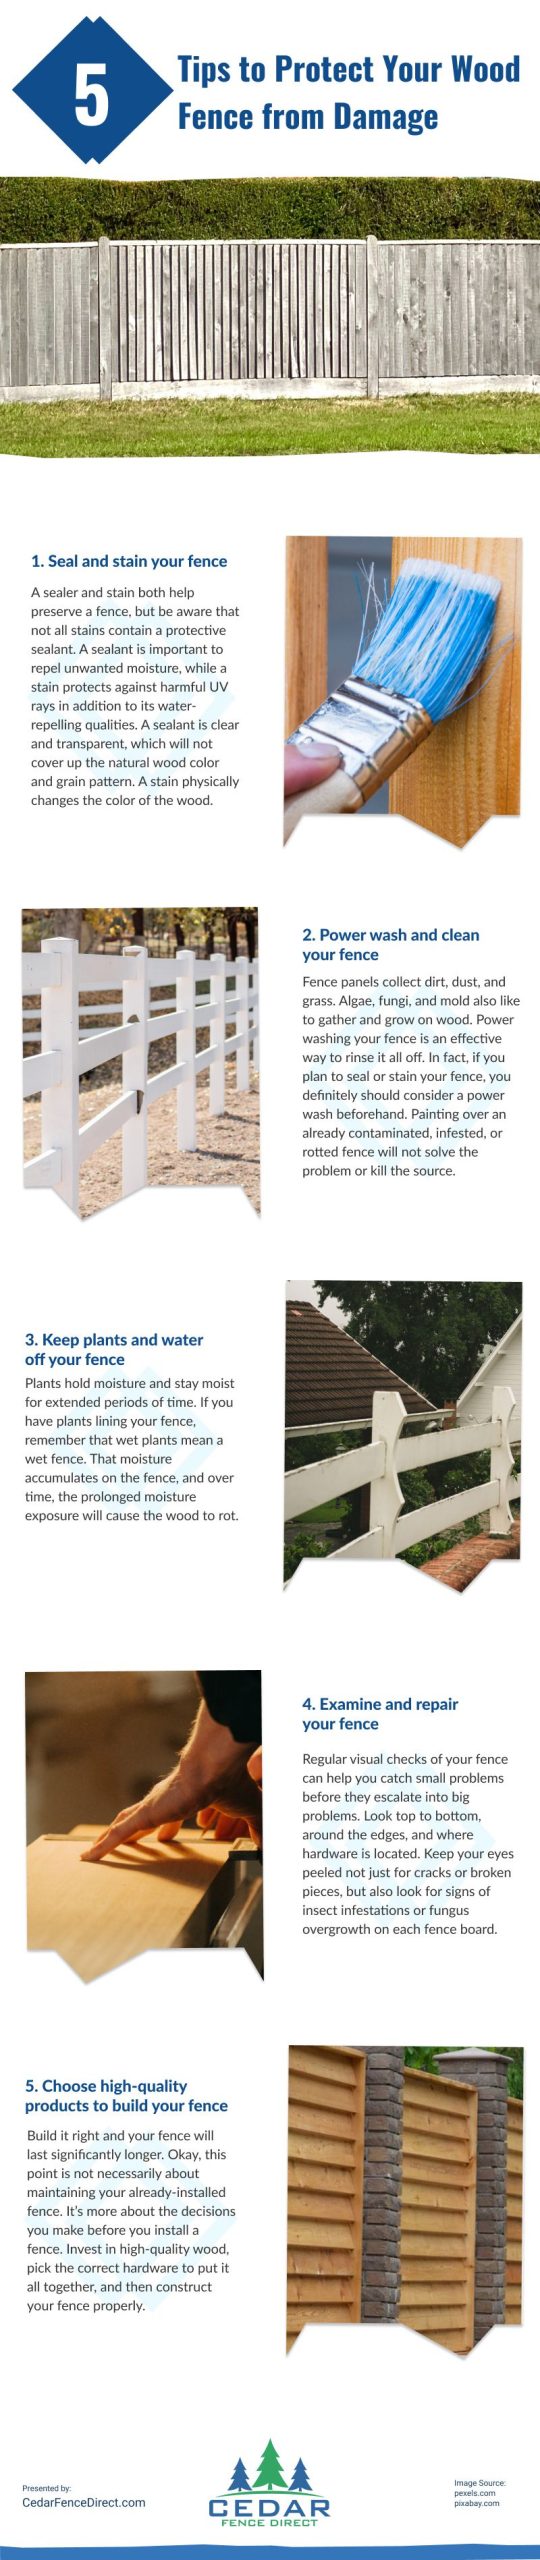 5 Tips to Protect Your Wood Fence from Damage Infographic